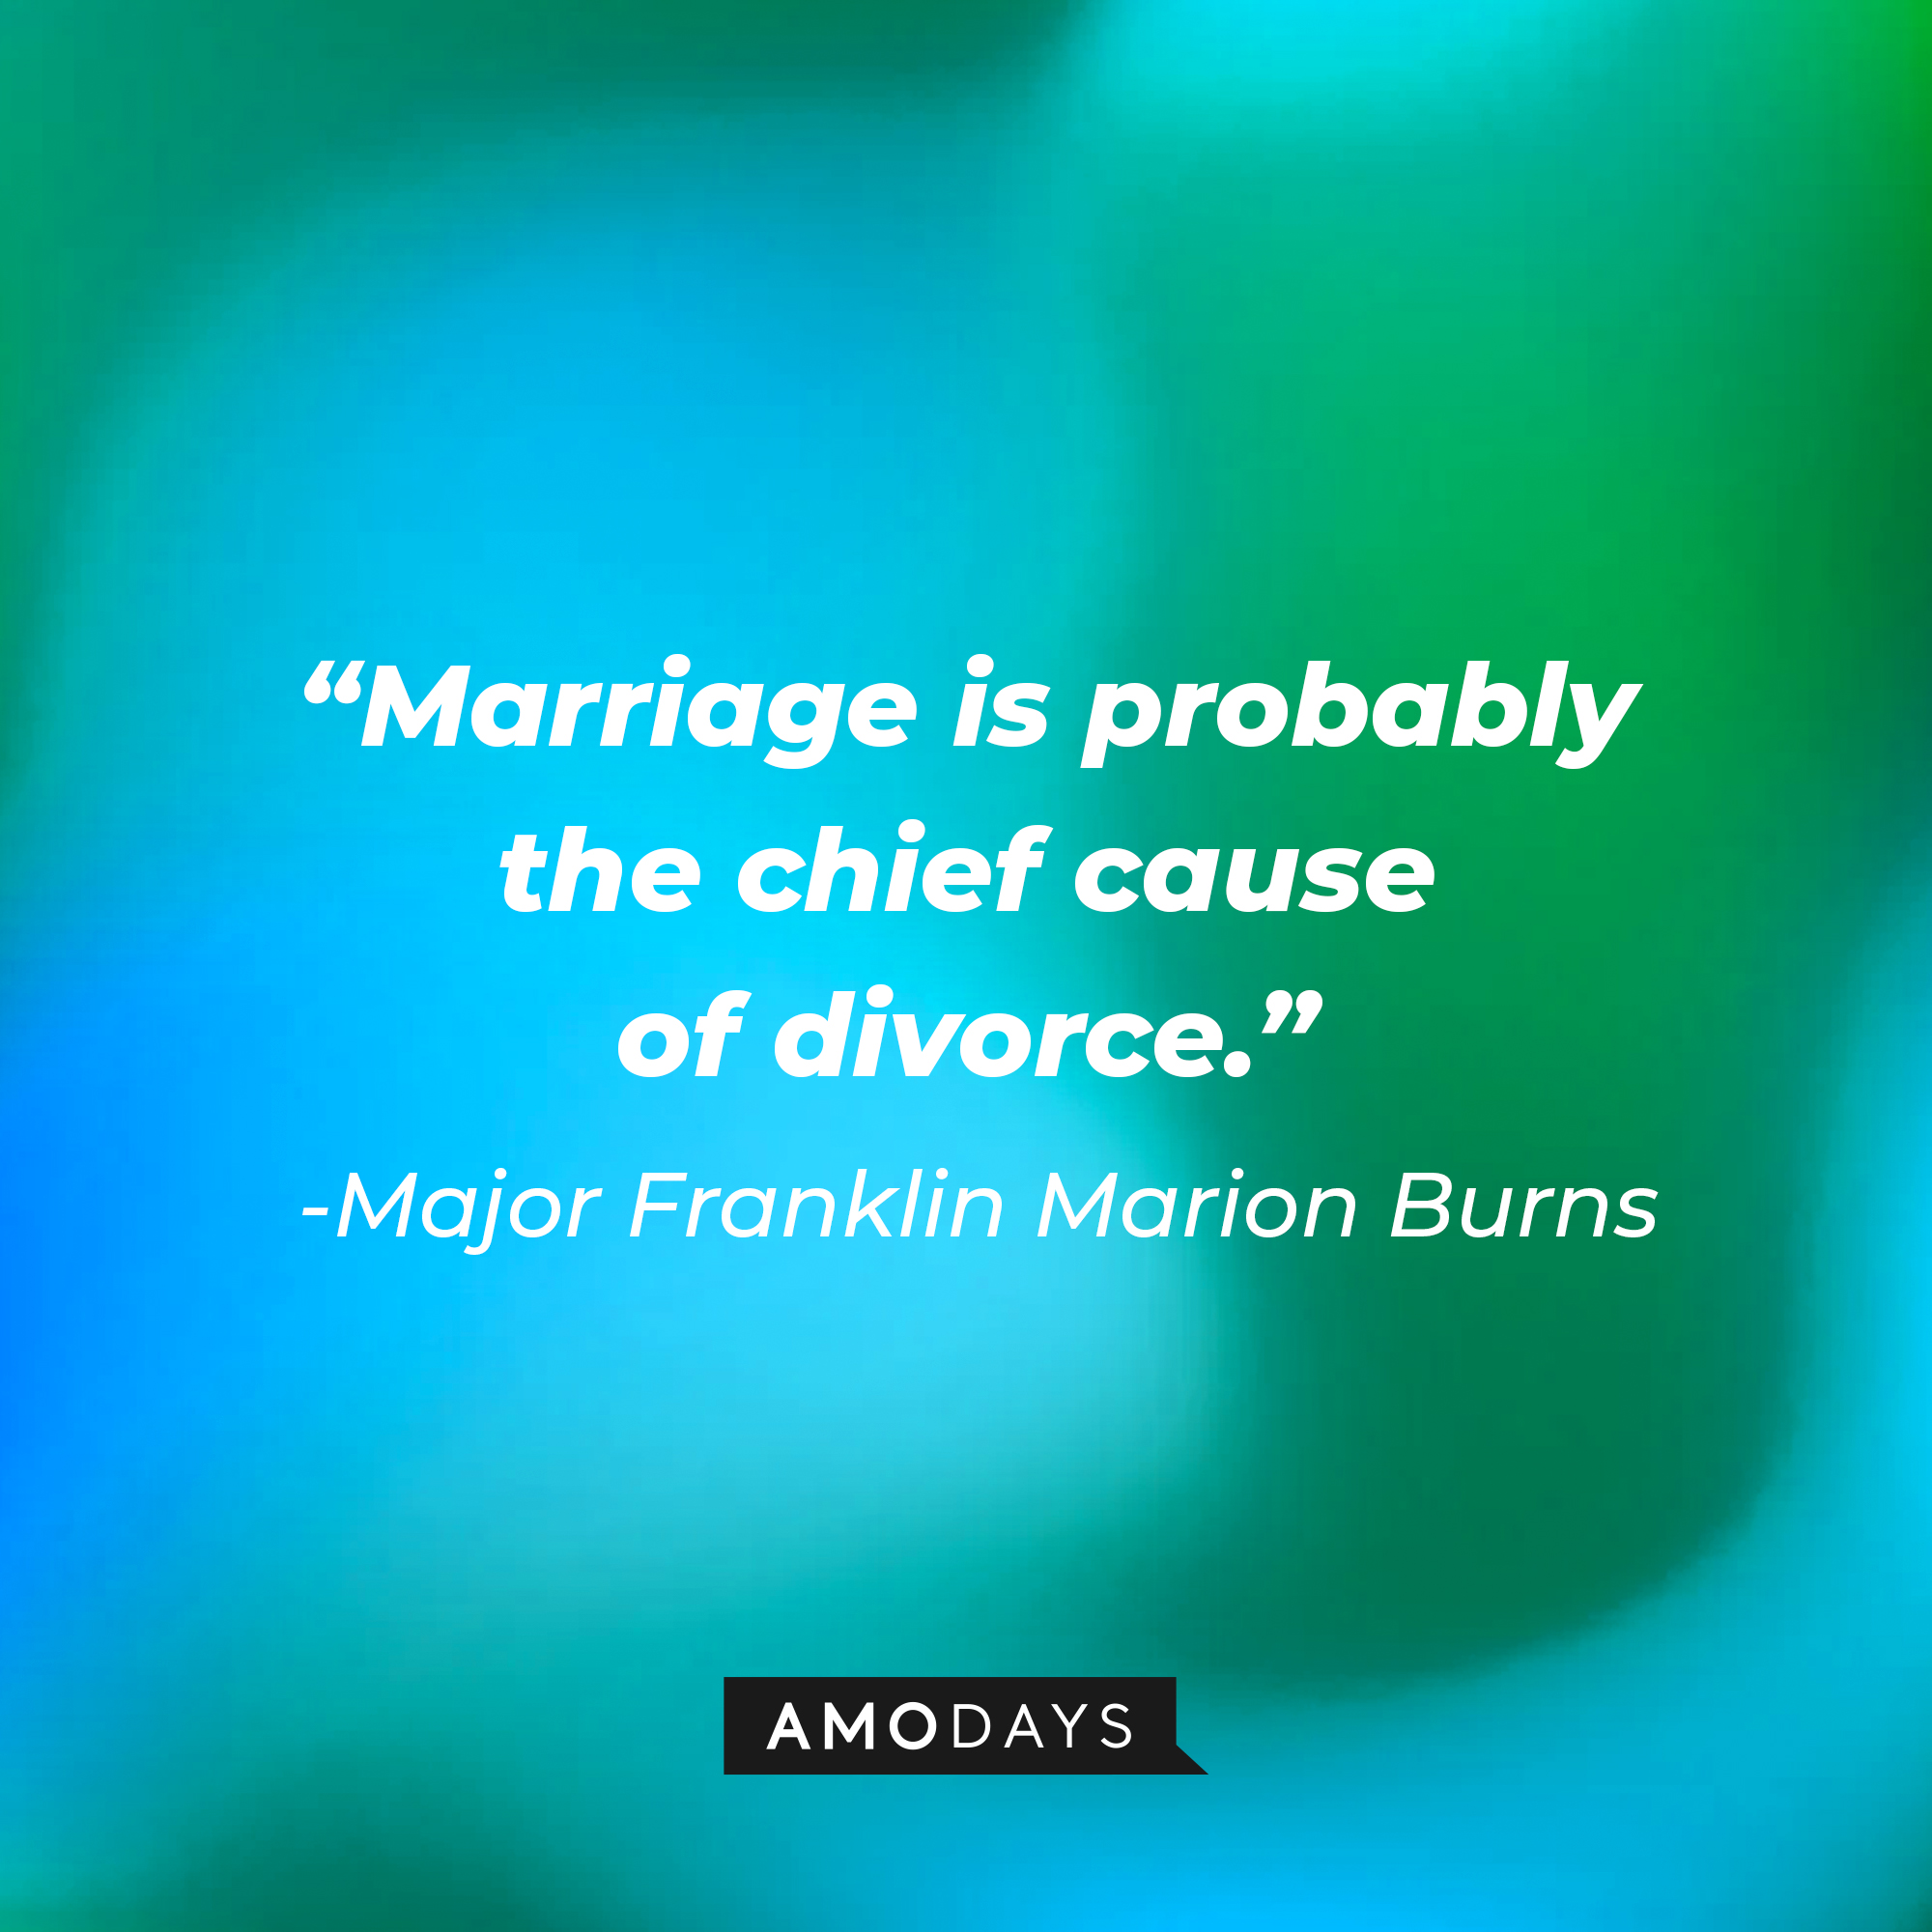 Major Franklin Marion Burns’ quote: “Marriage is probably the chief cause of divorce.” | Source: AmoDays